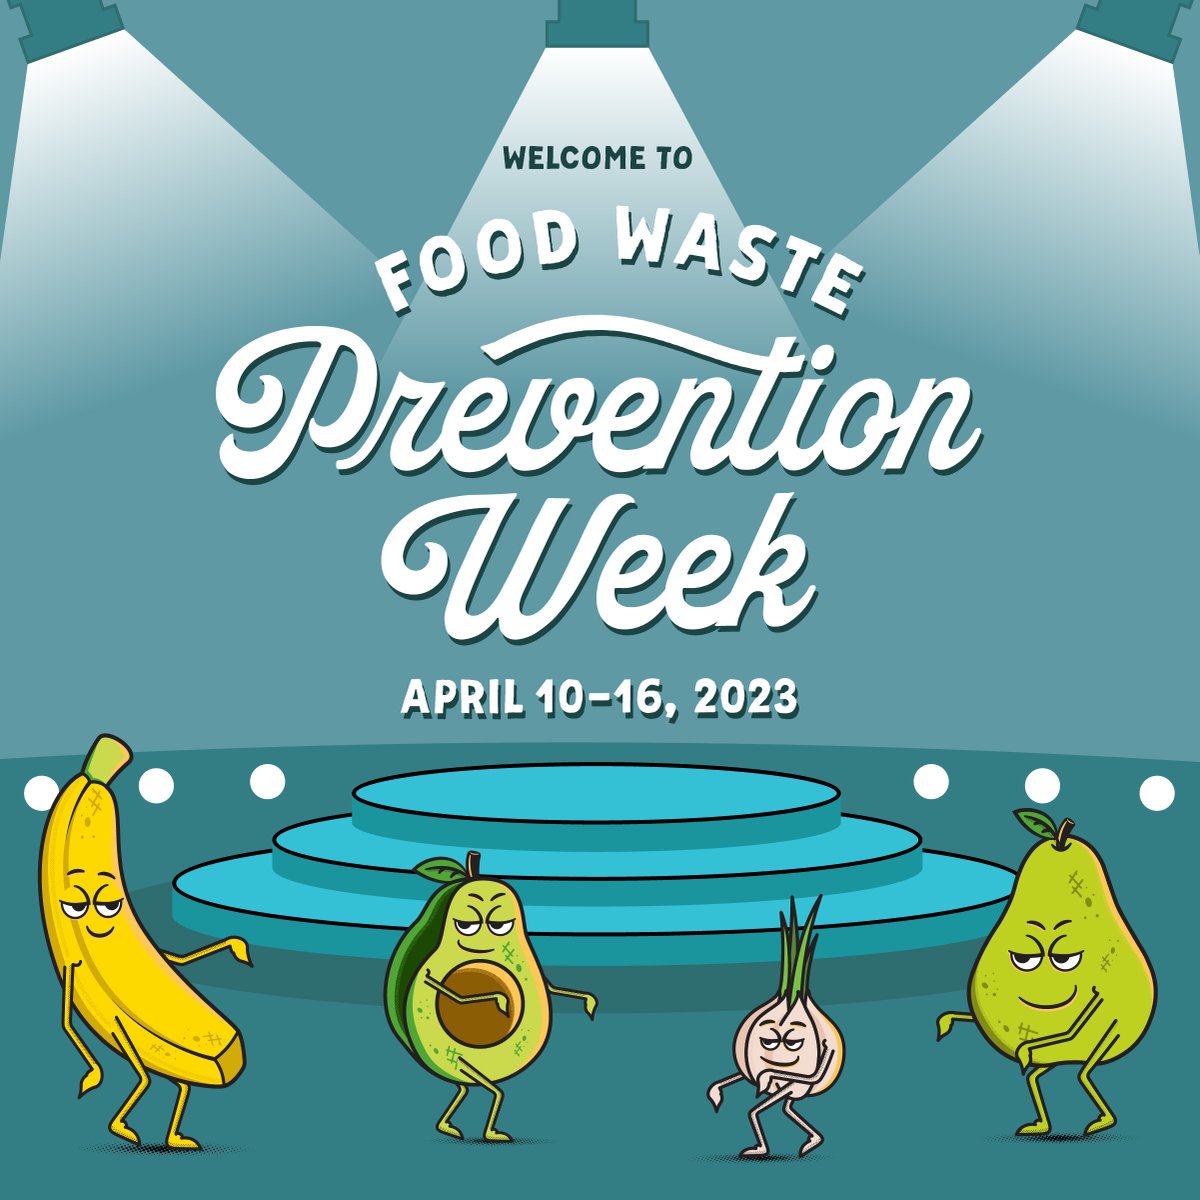 Happy #FoodWastePreventionWeek! Did you know that 1/3 of all food produced globally goes to waste? Let's reduce food waste by planning our meals, buying only what we need, and using leftovers creatively. Together, we can make a difference! #reducewaste #sustainability #MnTAP